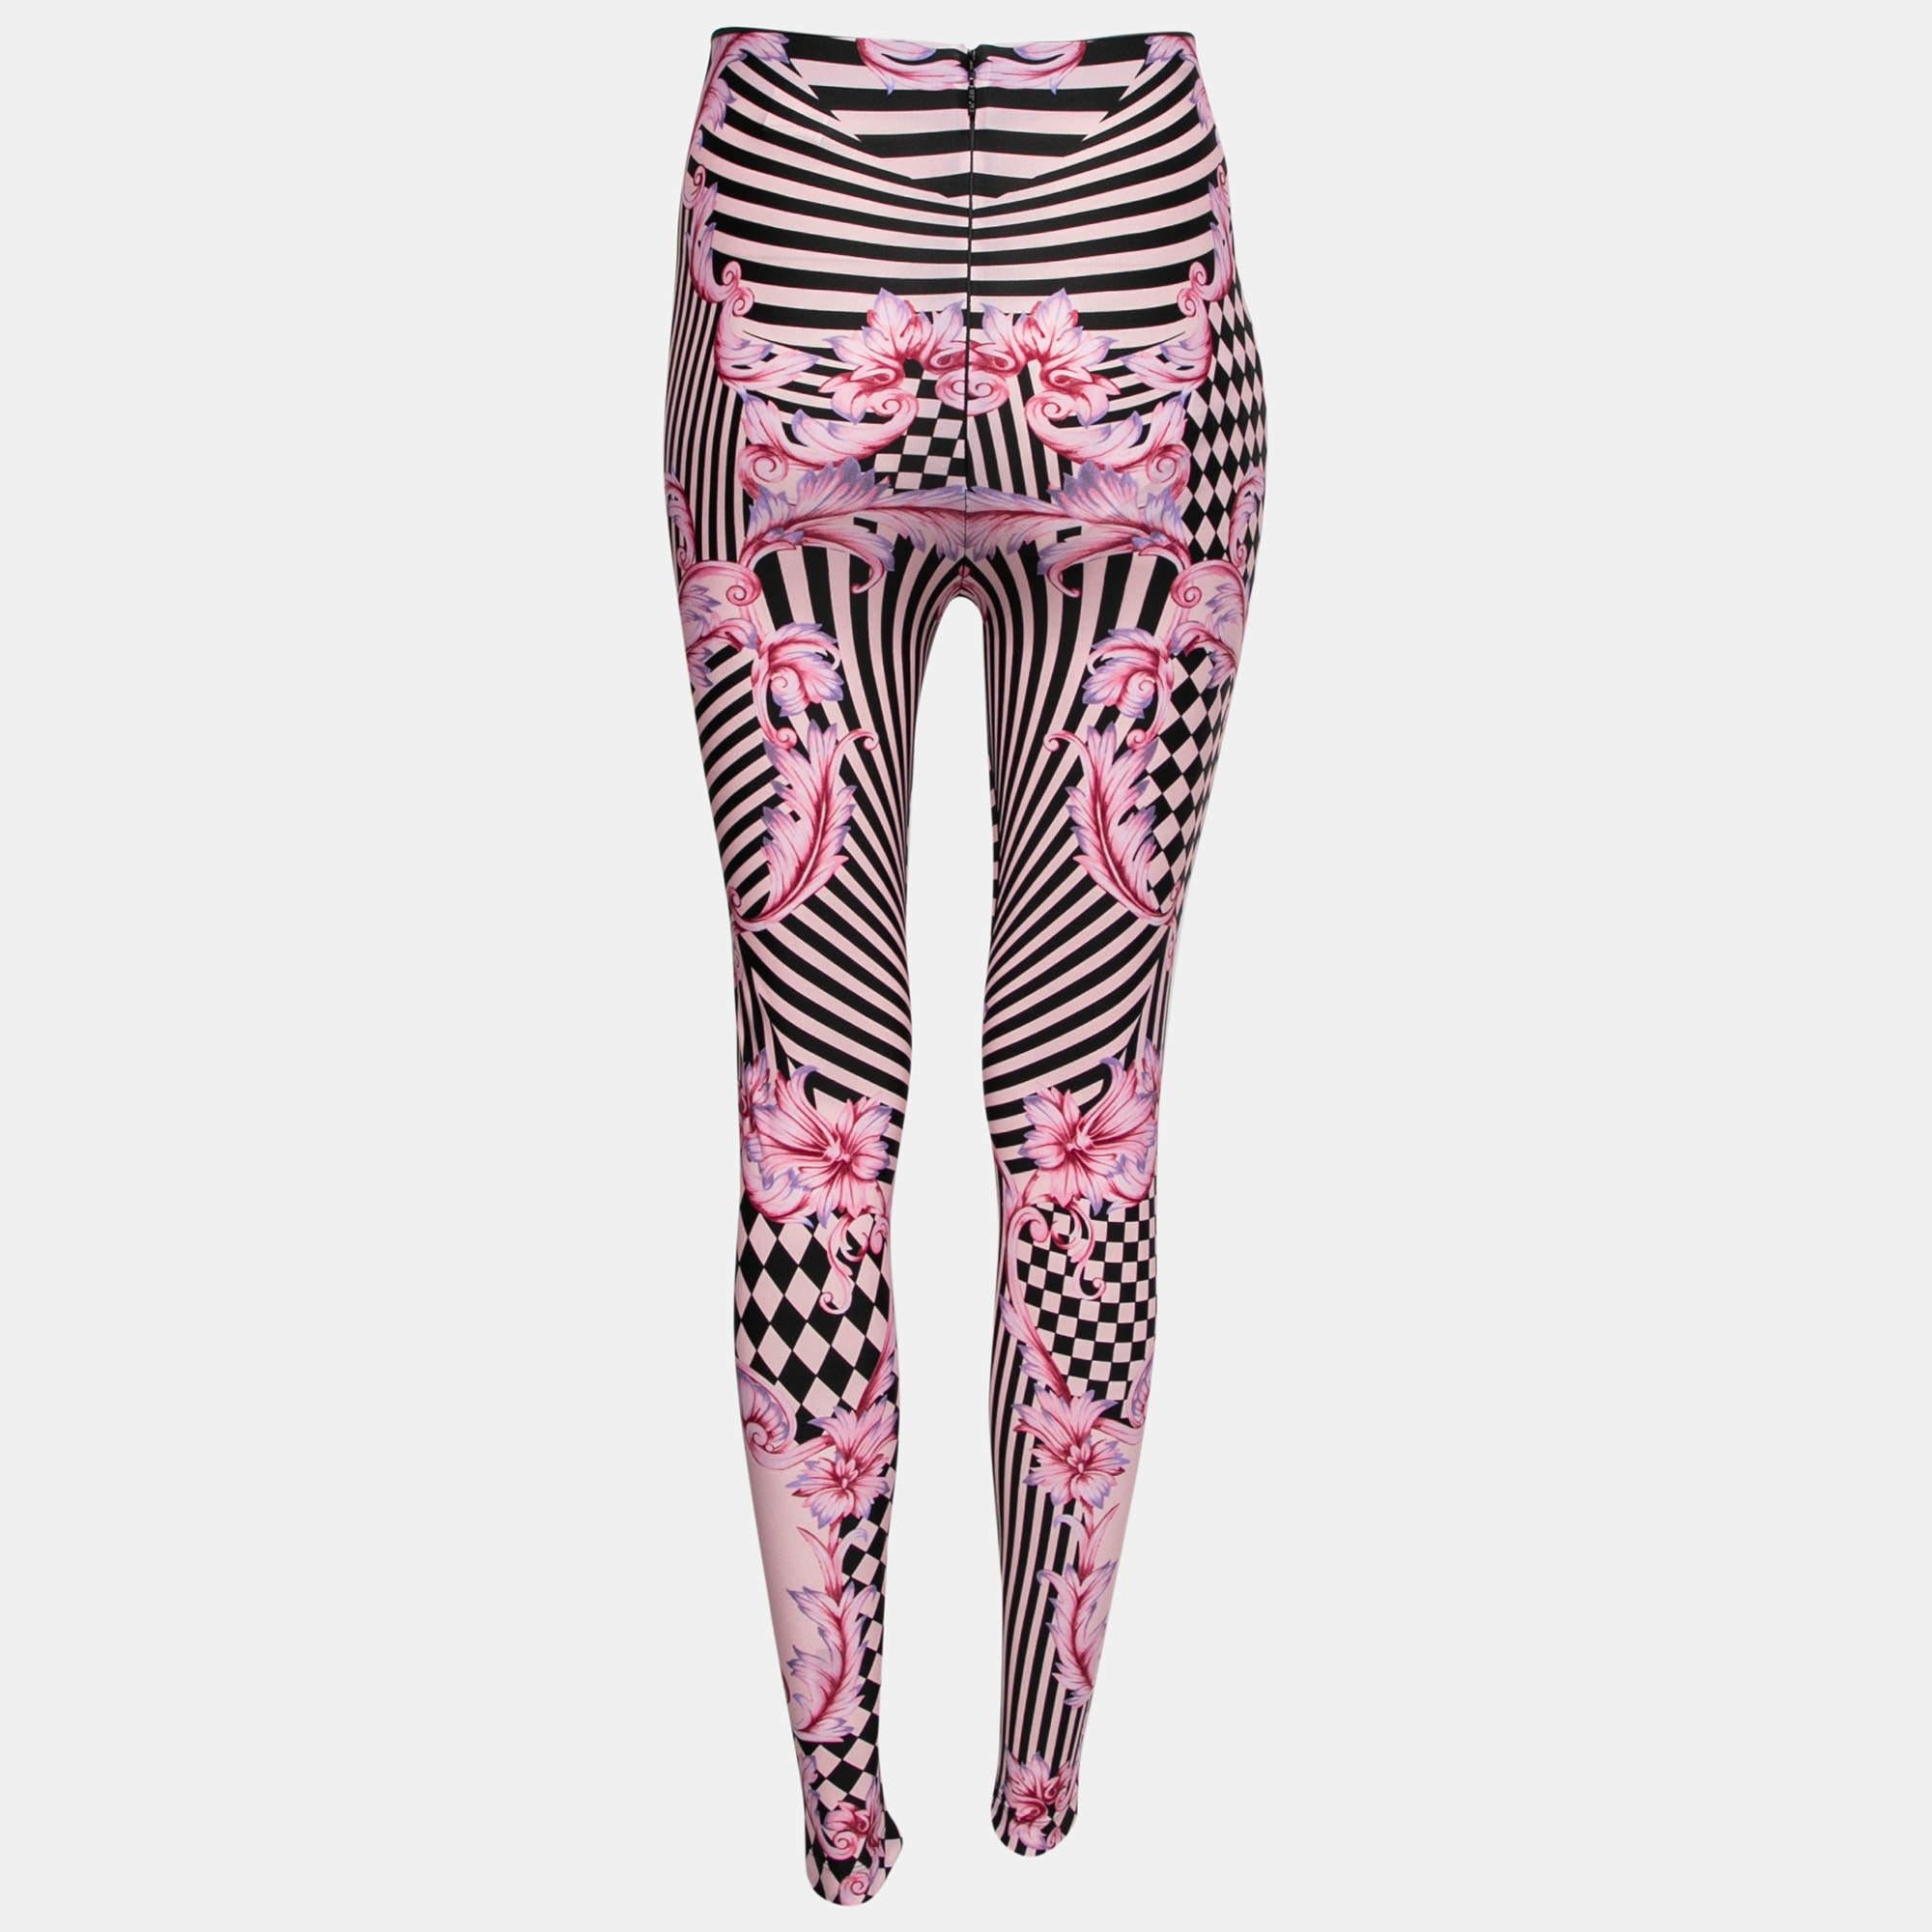 Create a chic look with these striped and Baroque print leggings from Versace. They've been made from fine materials and have a slim fit. Team them with a simple black tank top to balance the ensemble.

